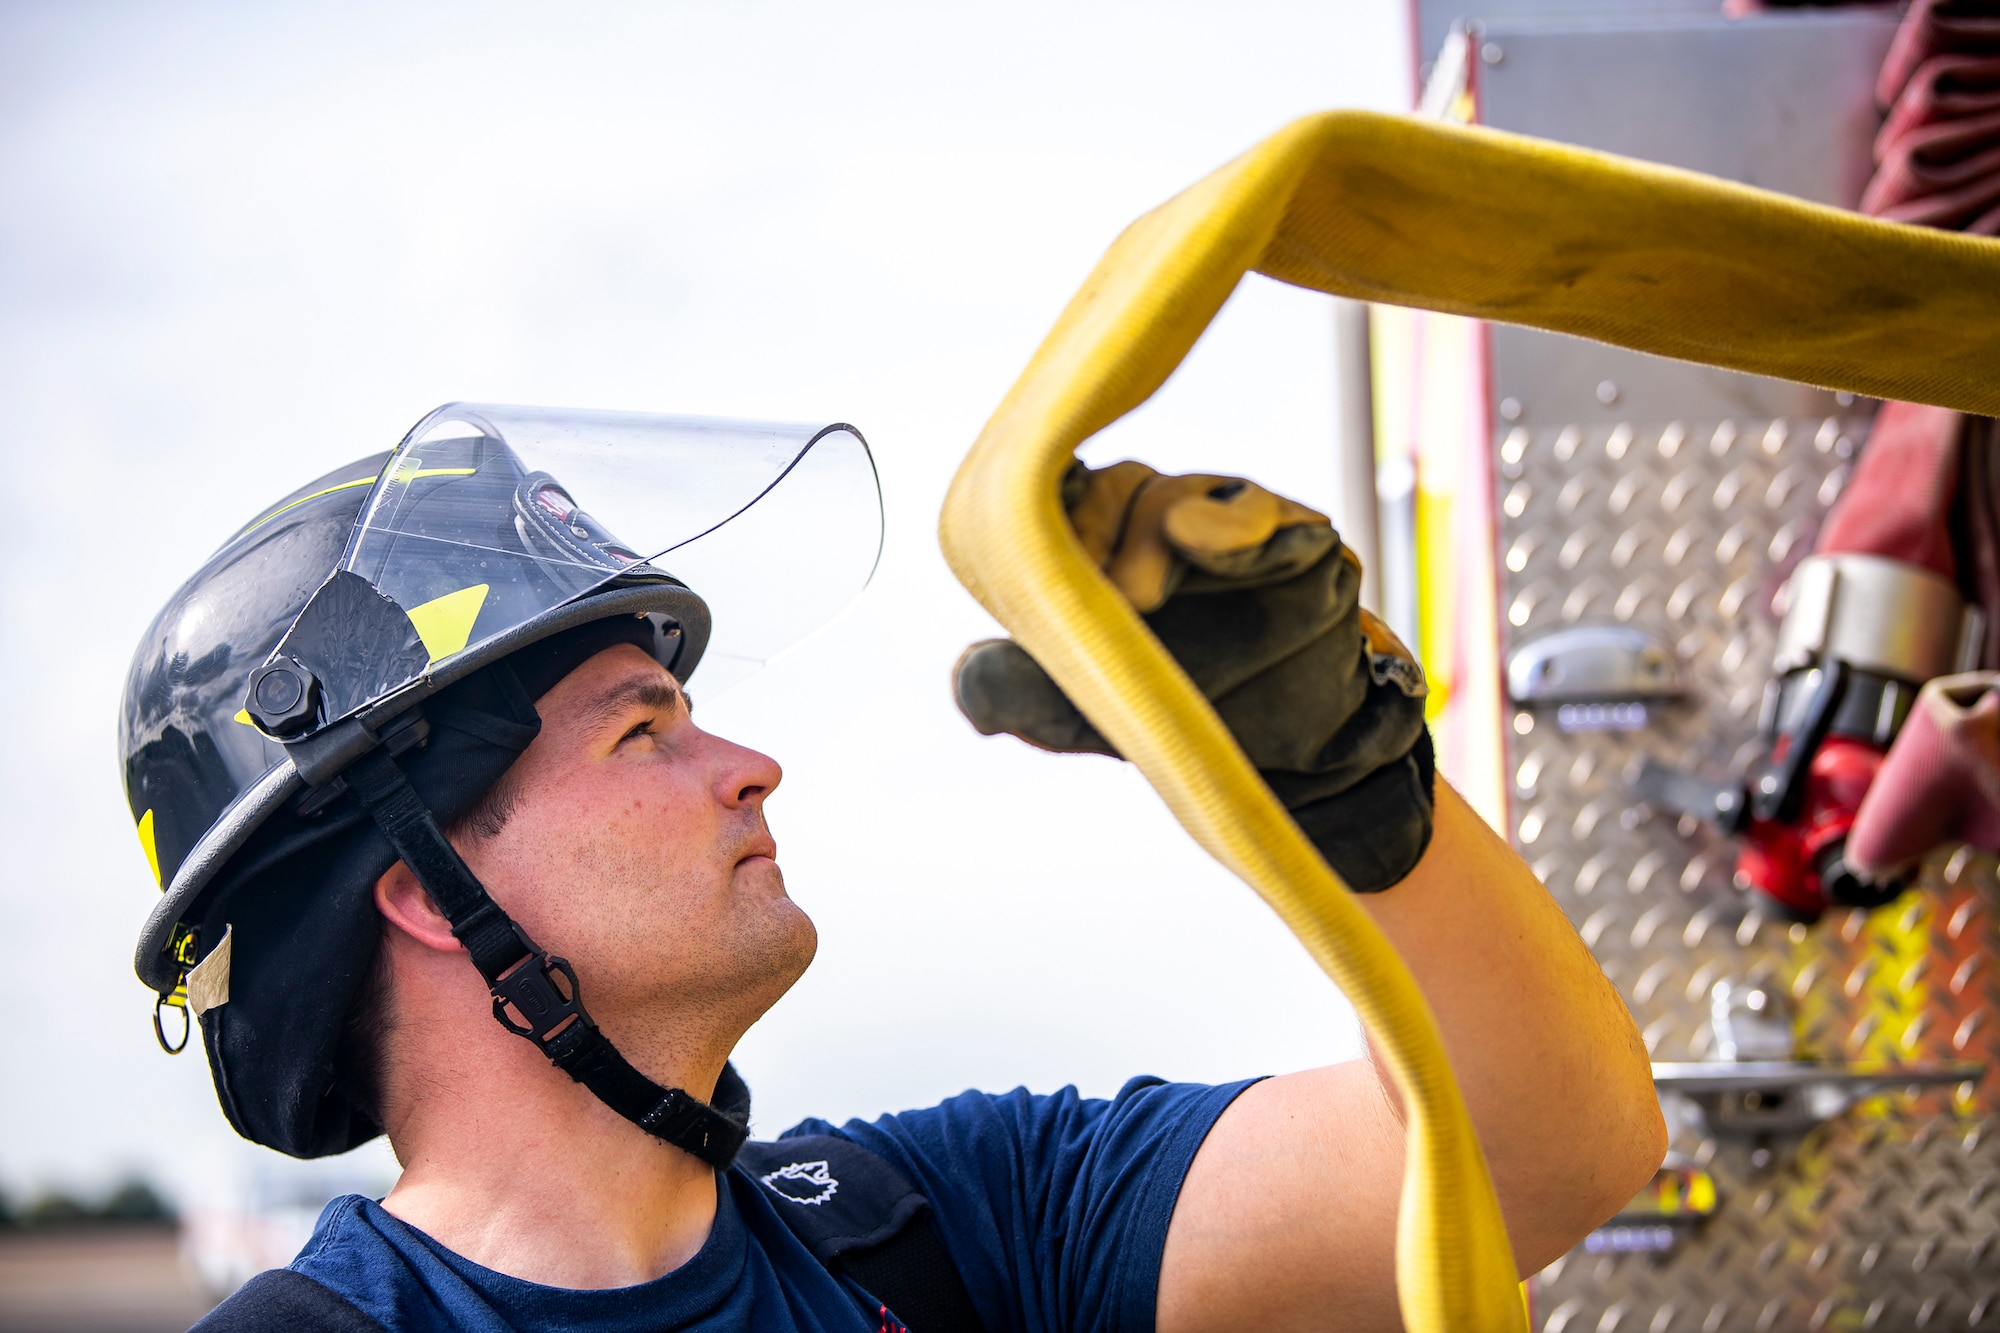 A firefighter from the 422d Fire Emergency Services rolls a fire hose following a live-fire training exercise at RAF Fairford, England, Oct. 3, 2022. Firefighters from the 422d FES, are required to complete live-fire training bi-annually to test thief overall readiness and ability to properly extinguish an aircraft fire. (U.S. Air Force photo by Staff Sgt. Eugene Oliver)